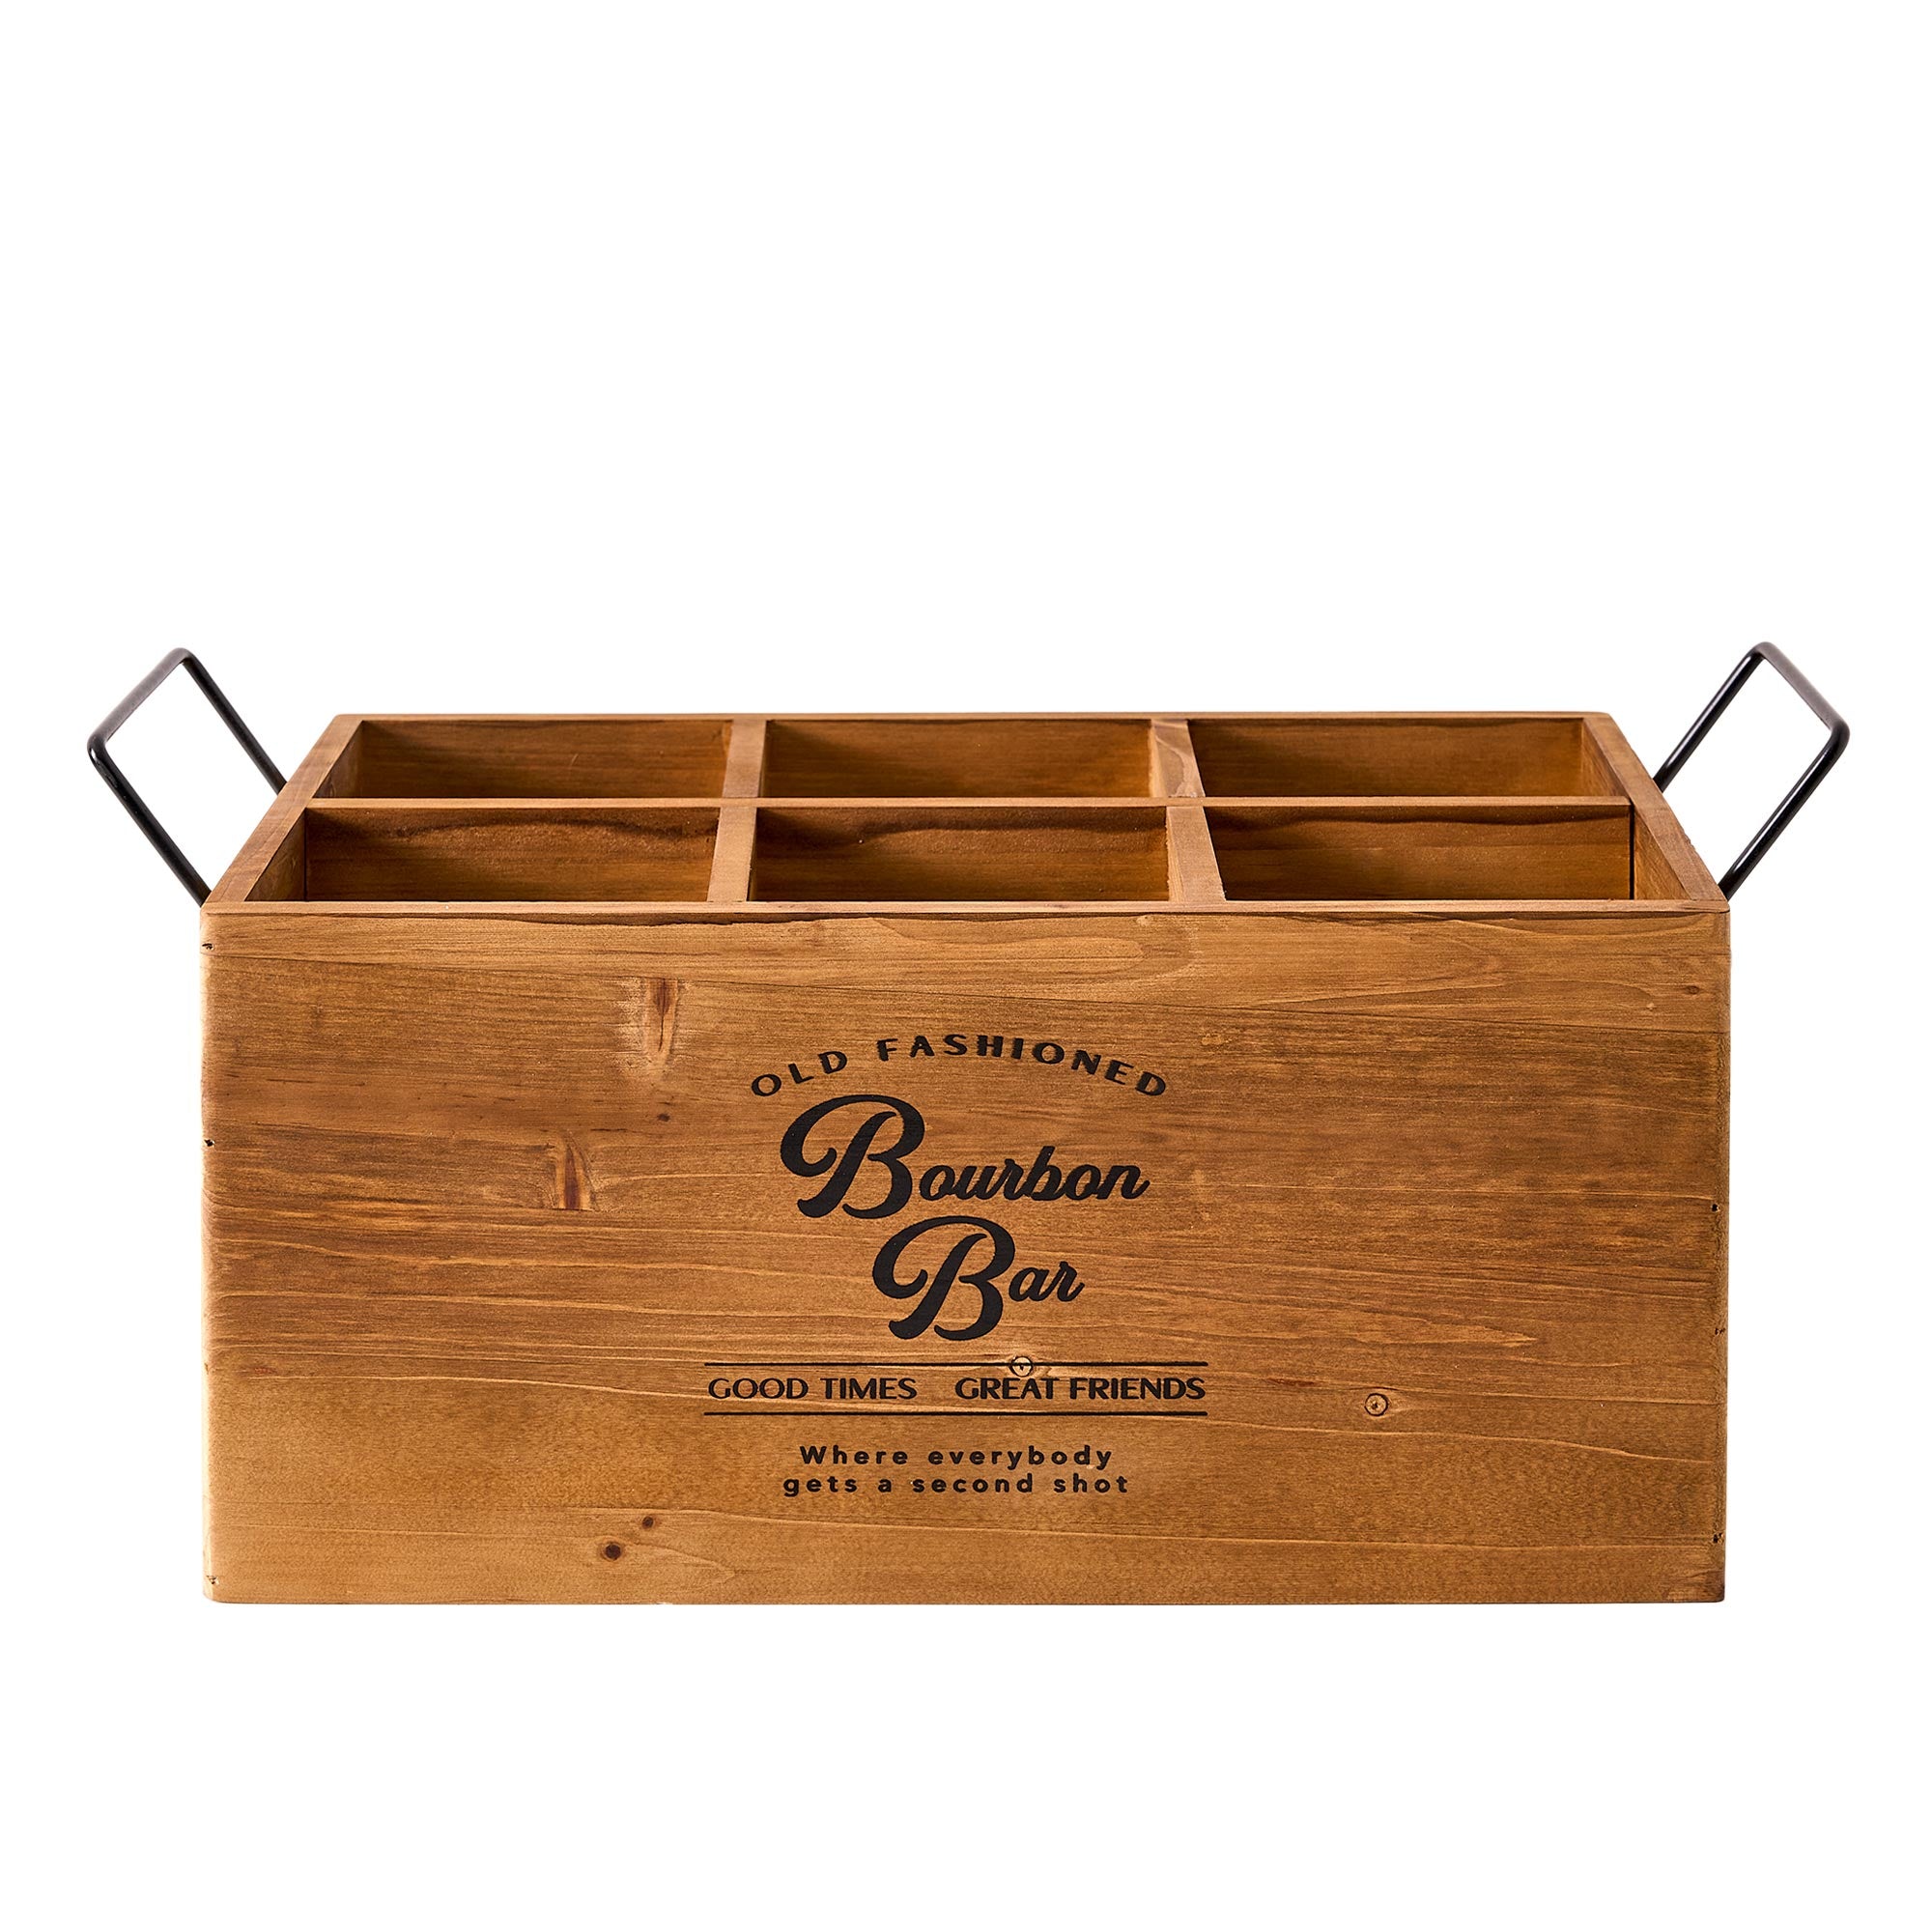 The Bourbon Bar Wood Crate Bottle Holder with Metal Handles - 7